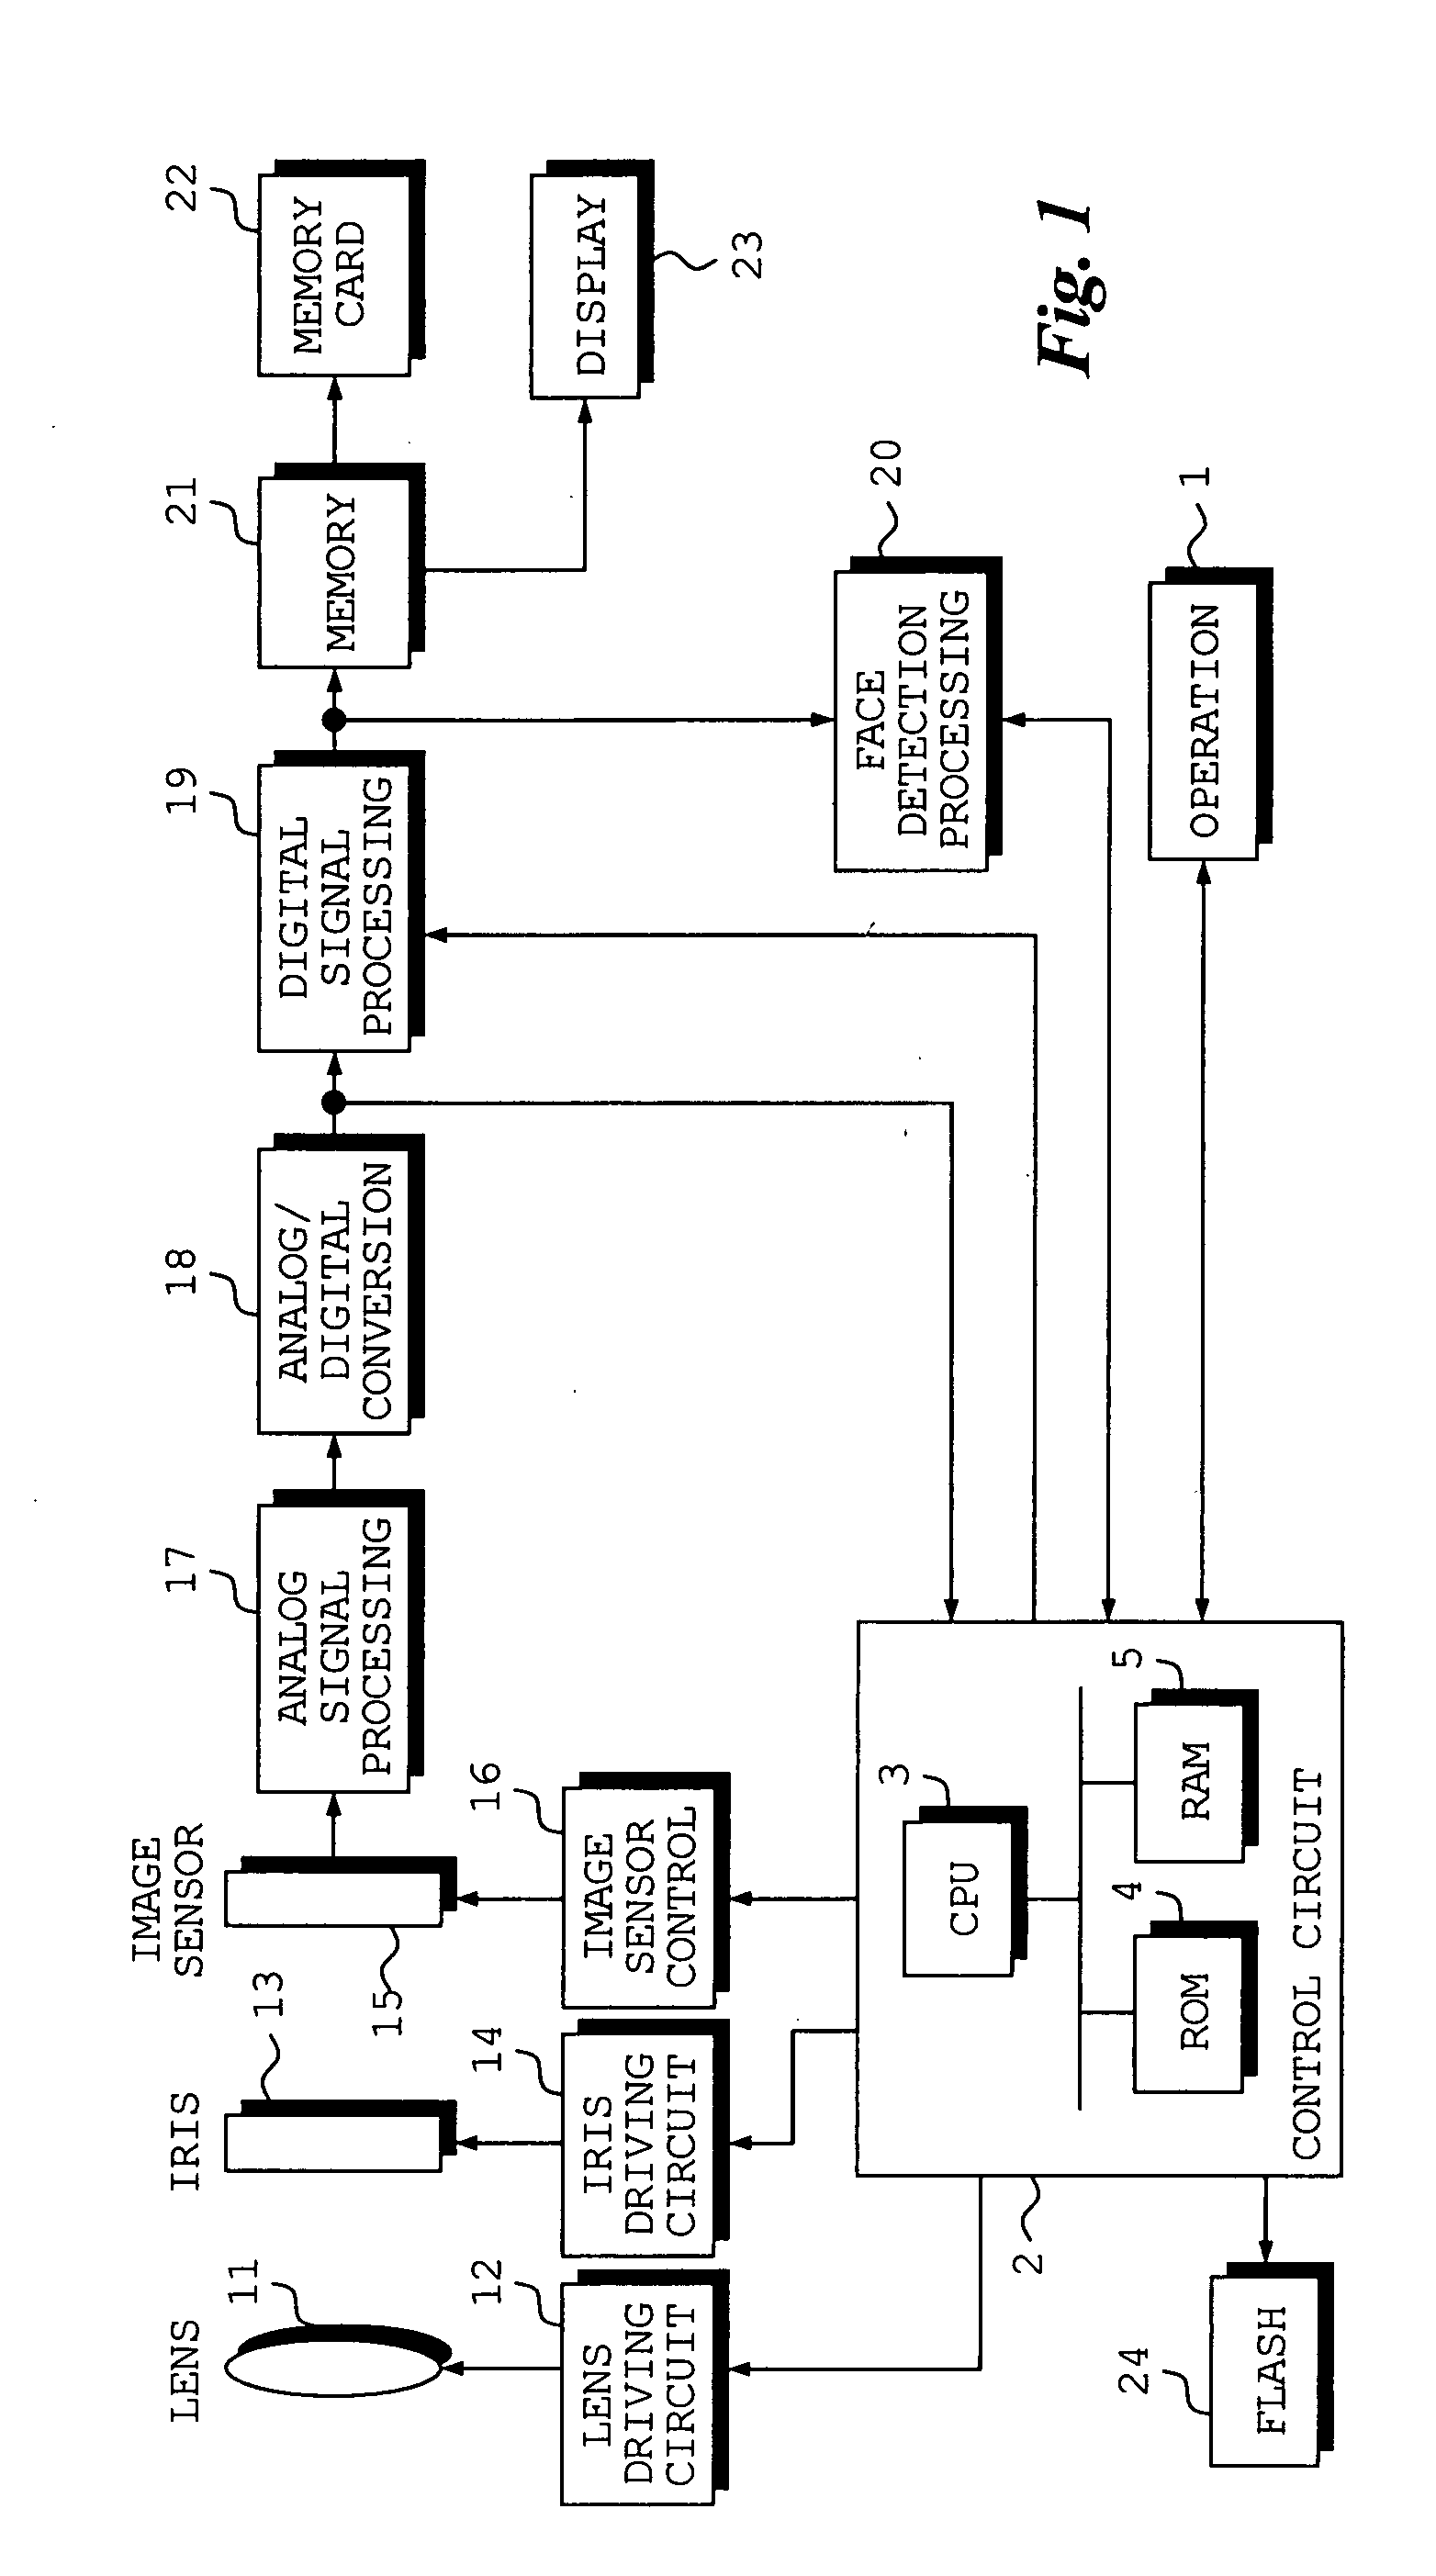 Brightness correction apparatus for moving images, and method and program for controlling same